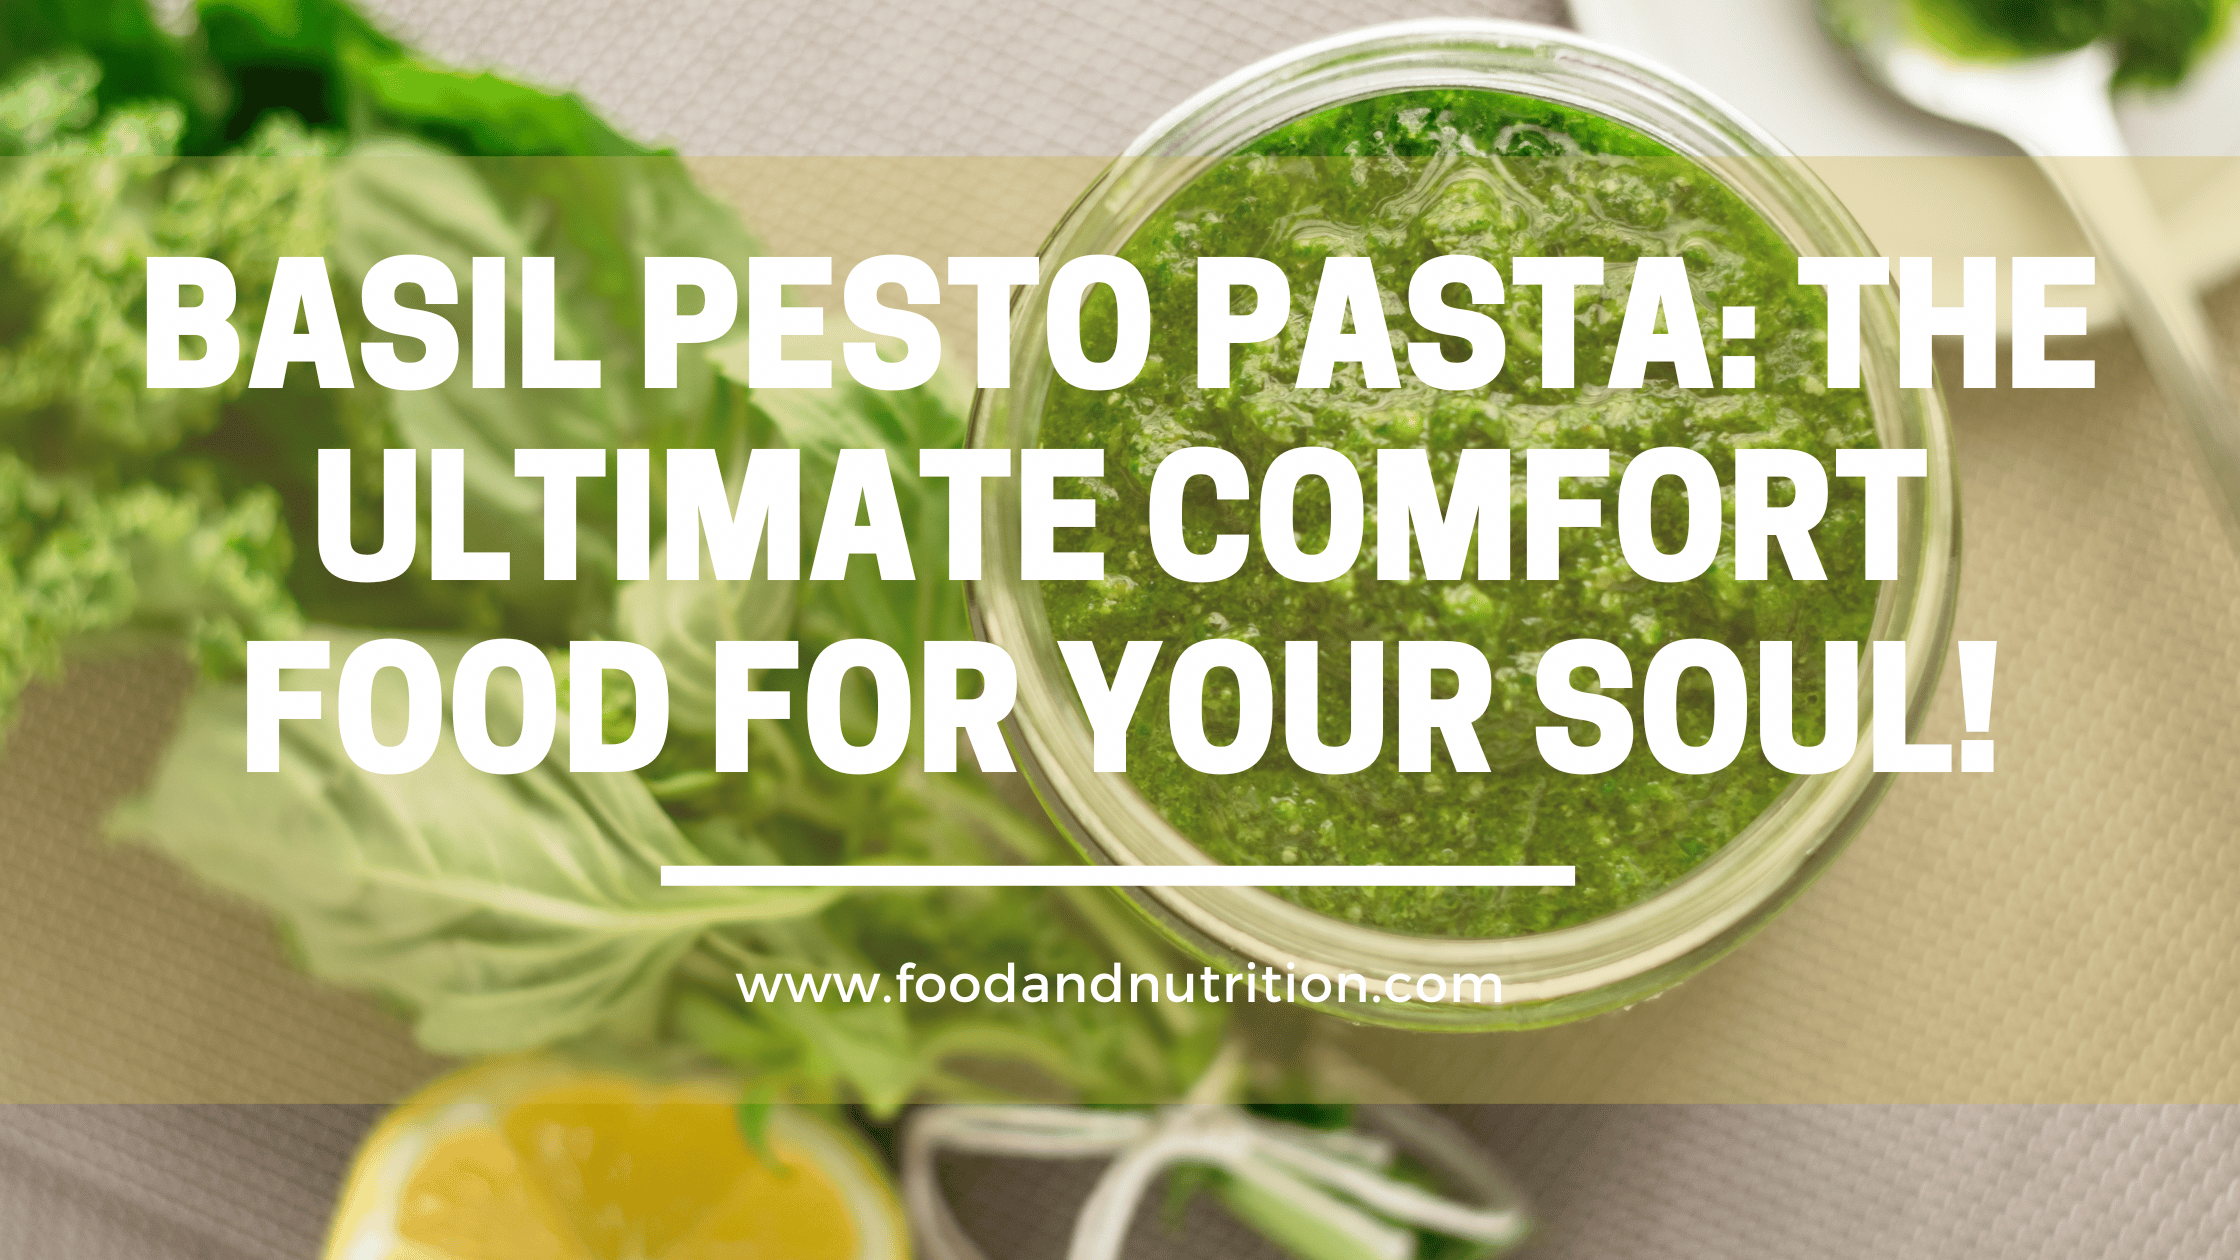 Basil Pesto Pasta: The Ultimate Comfort Food for Your Soul!